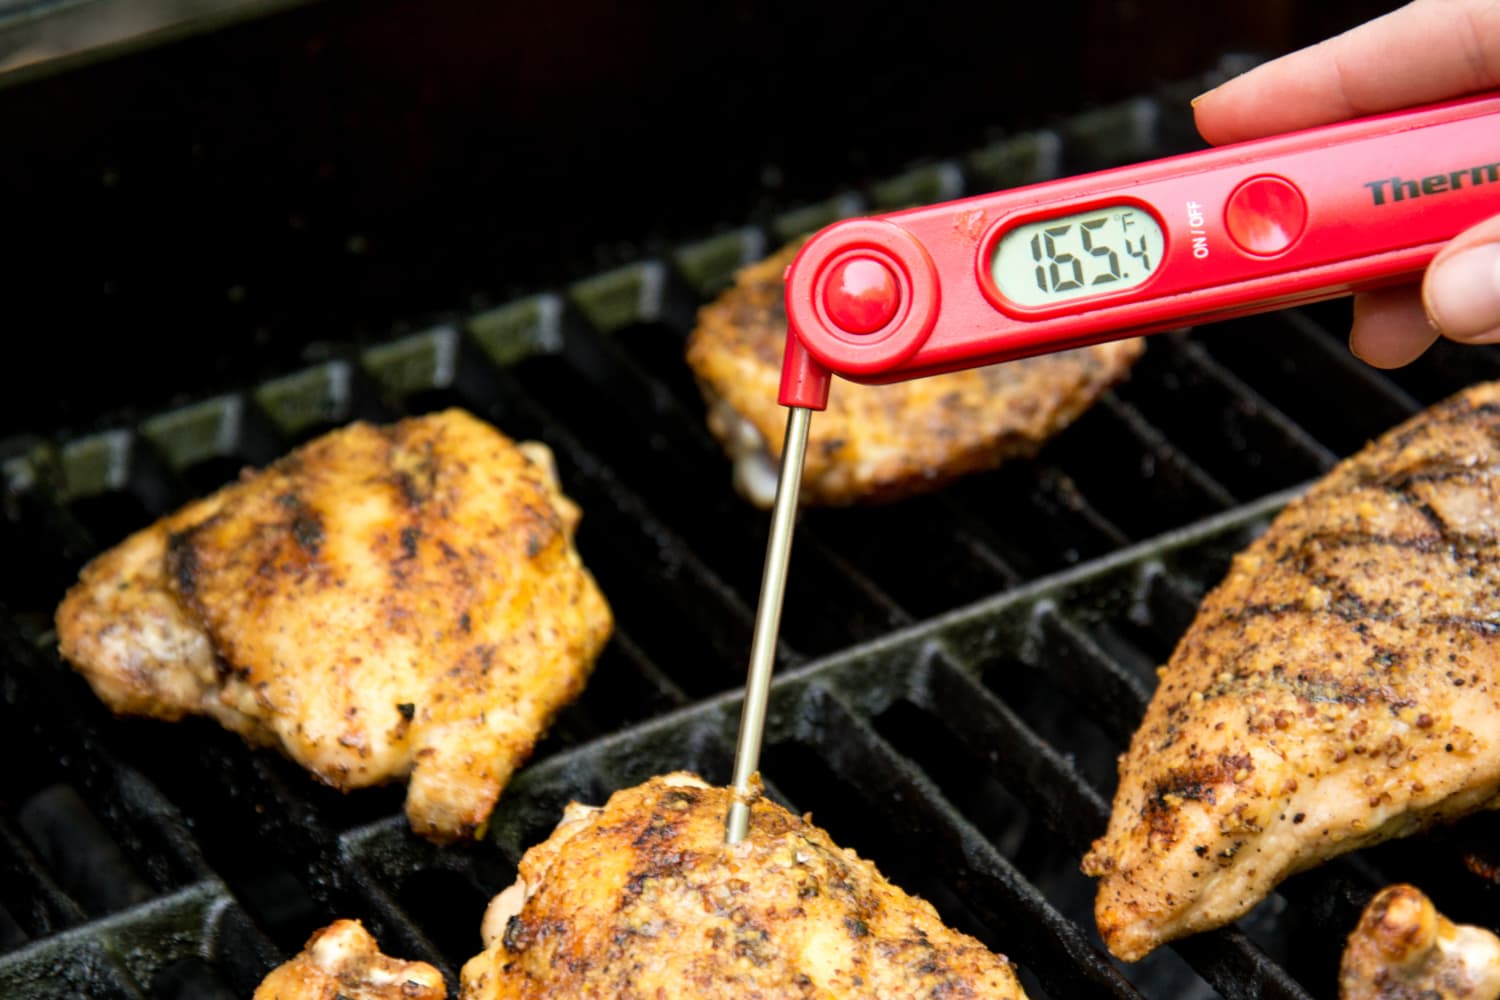 Digital Instant Read Meat Thermometer, Kitchen Cooking Food Candy